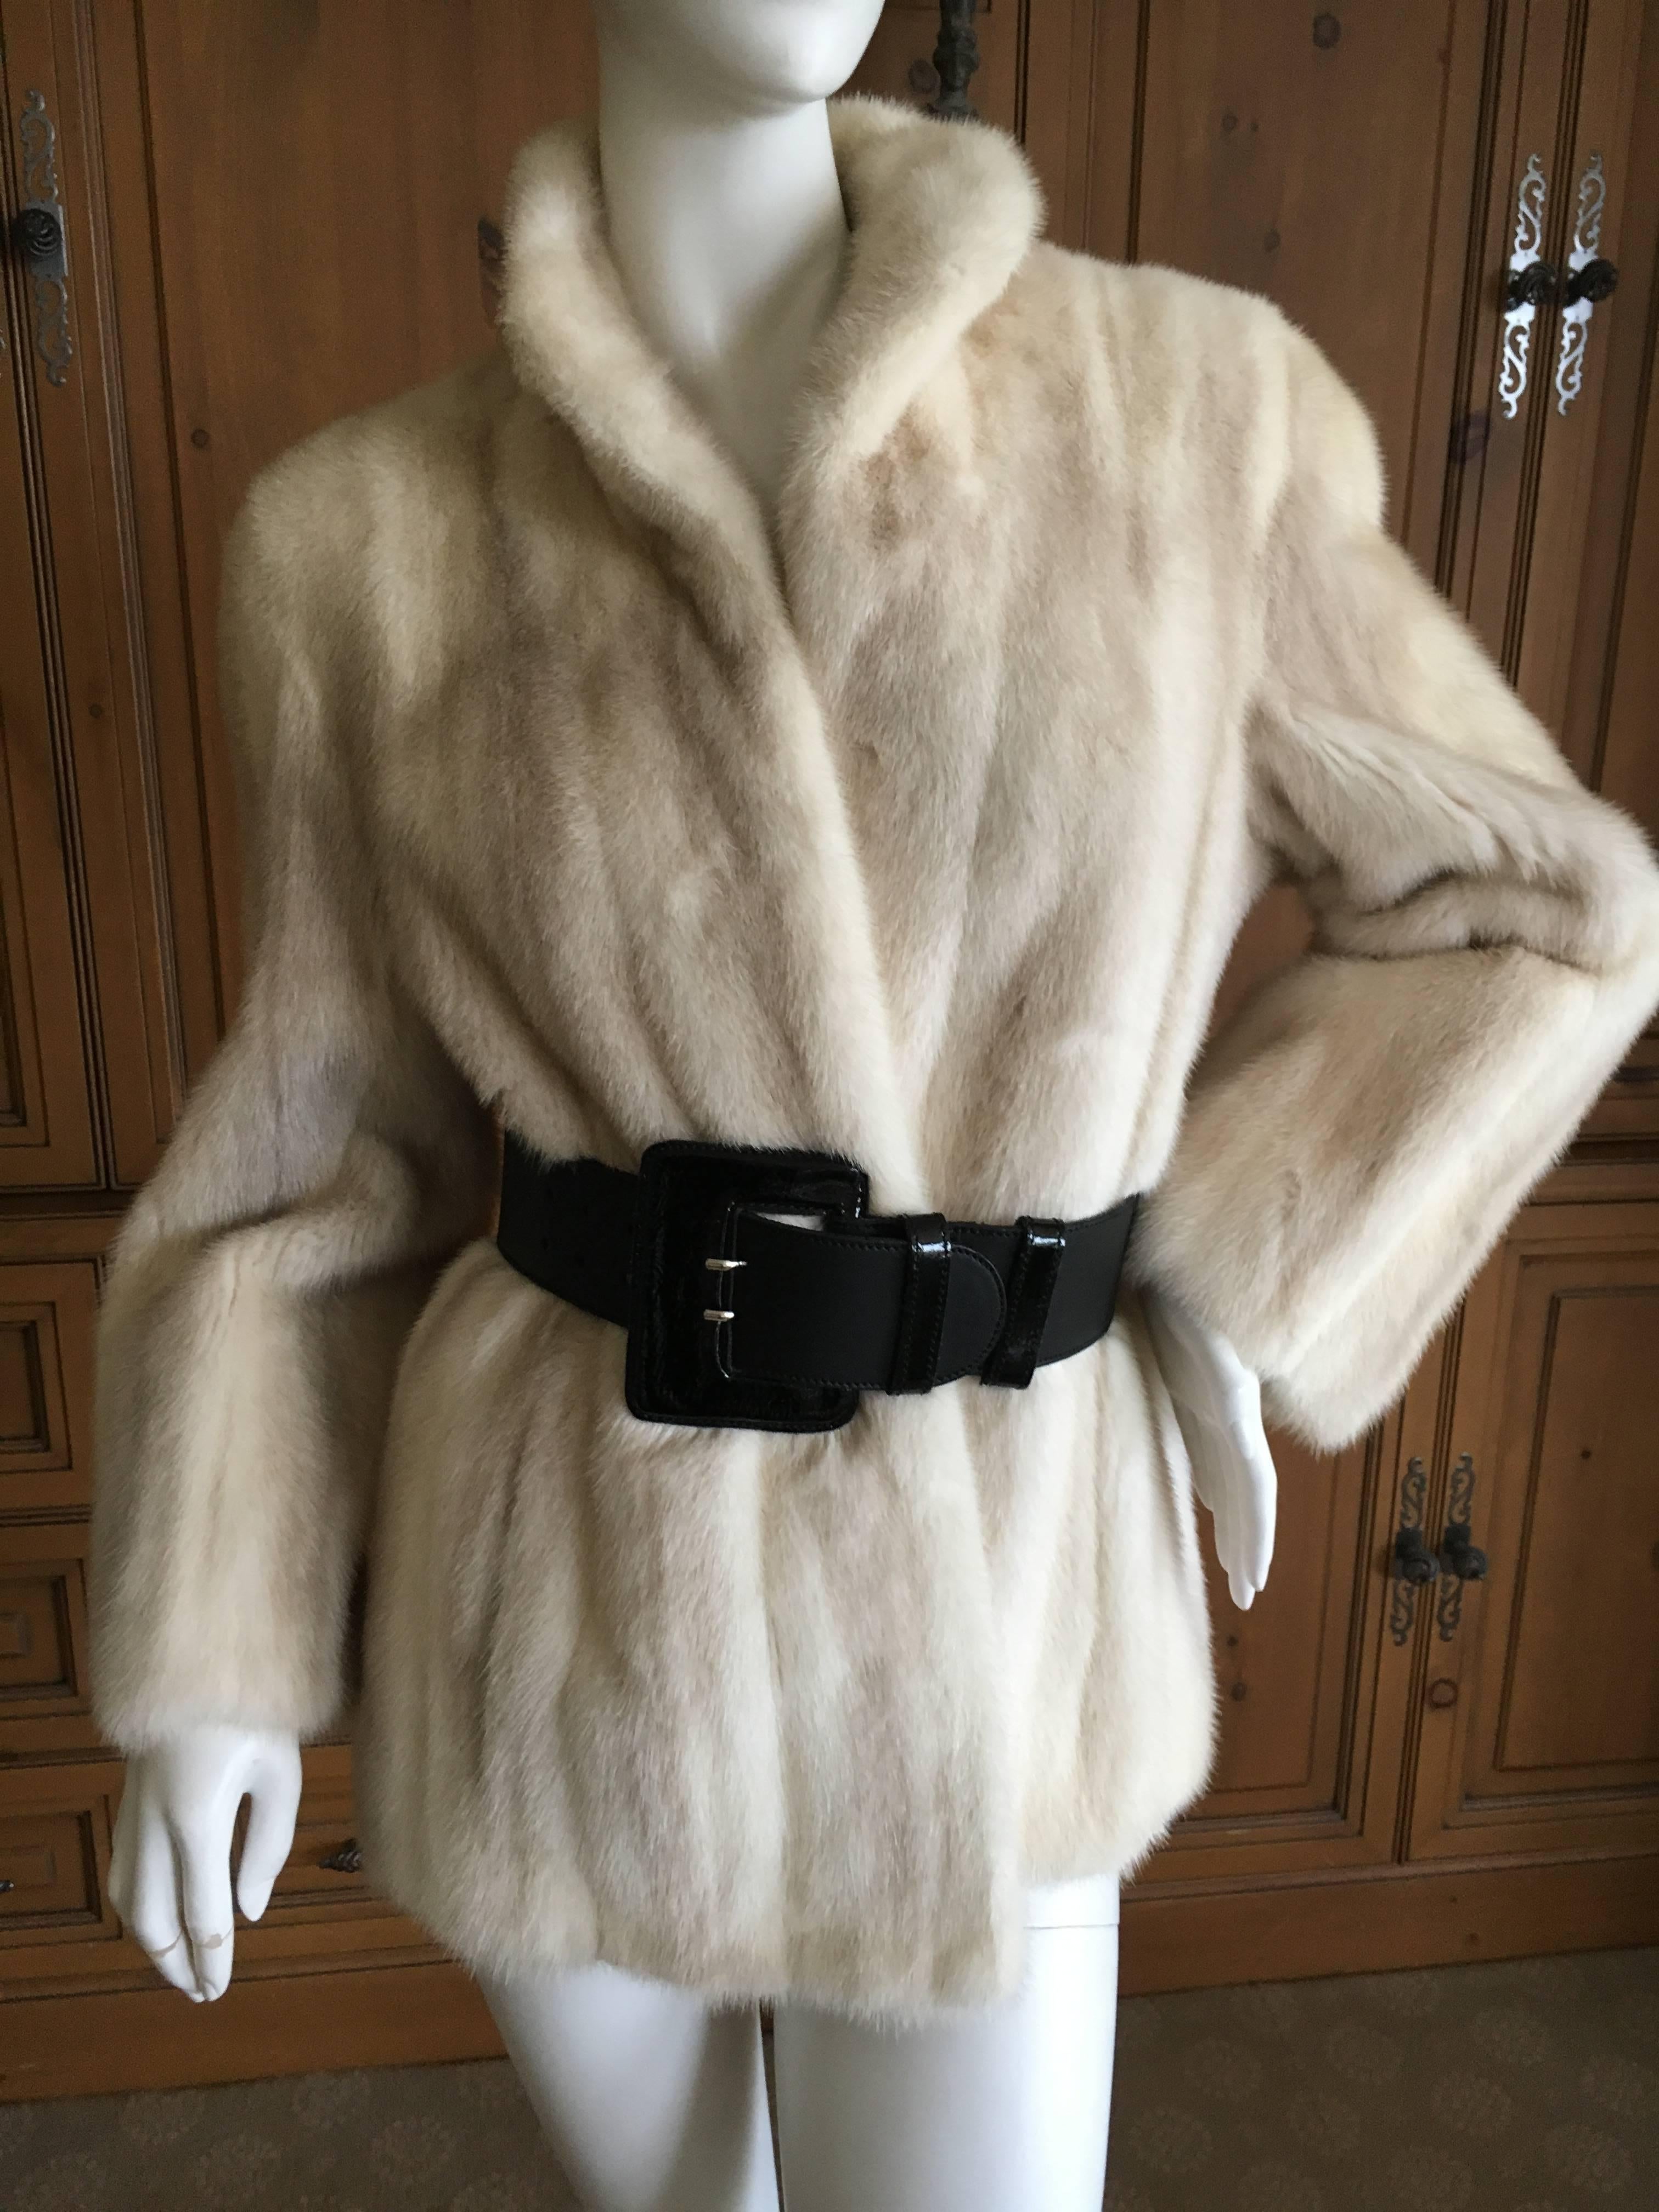 Luxurious female pelt natural pearl mink cropped jacket from
 Shumacher Furs , Portland Oregon.

Great pre owned Condition.
Belt for styling only, not included.
Bust 44"
Length 28"
Sleeve 21"
Sweep 46"
Comes with